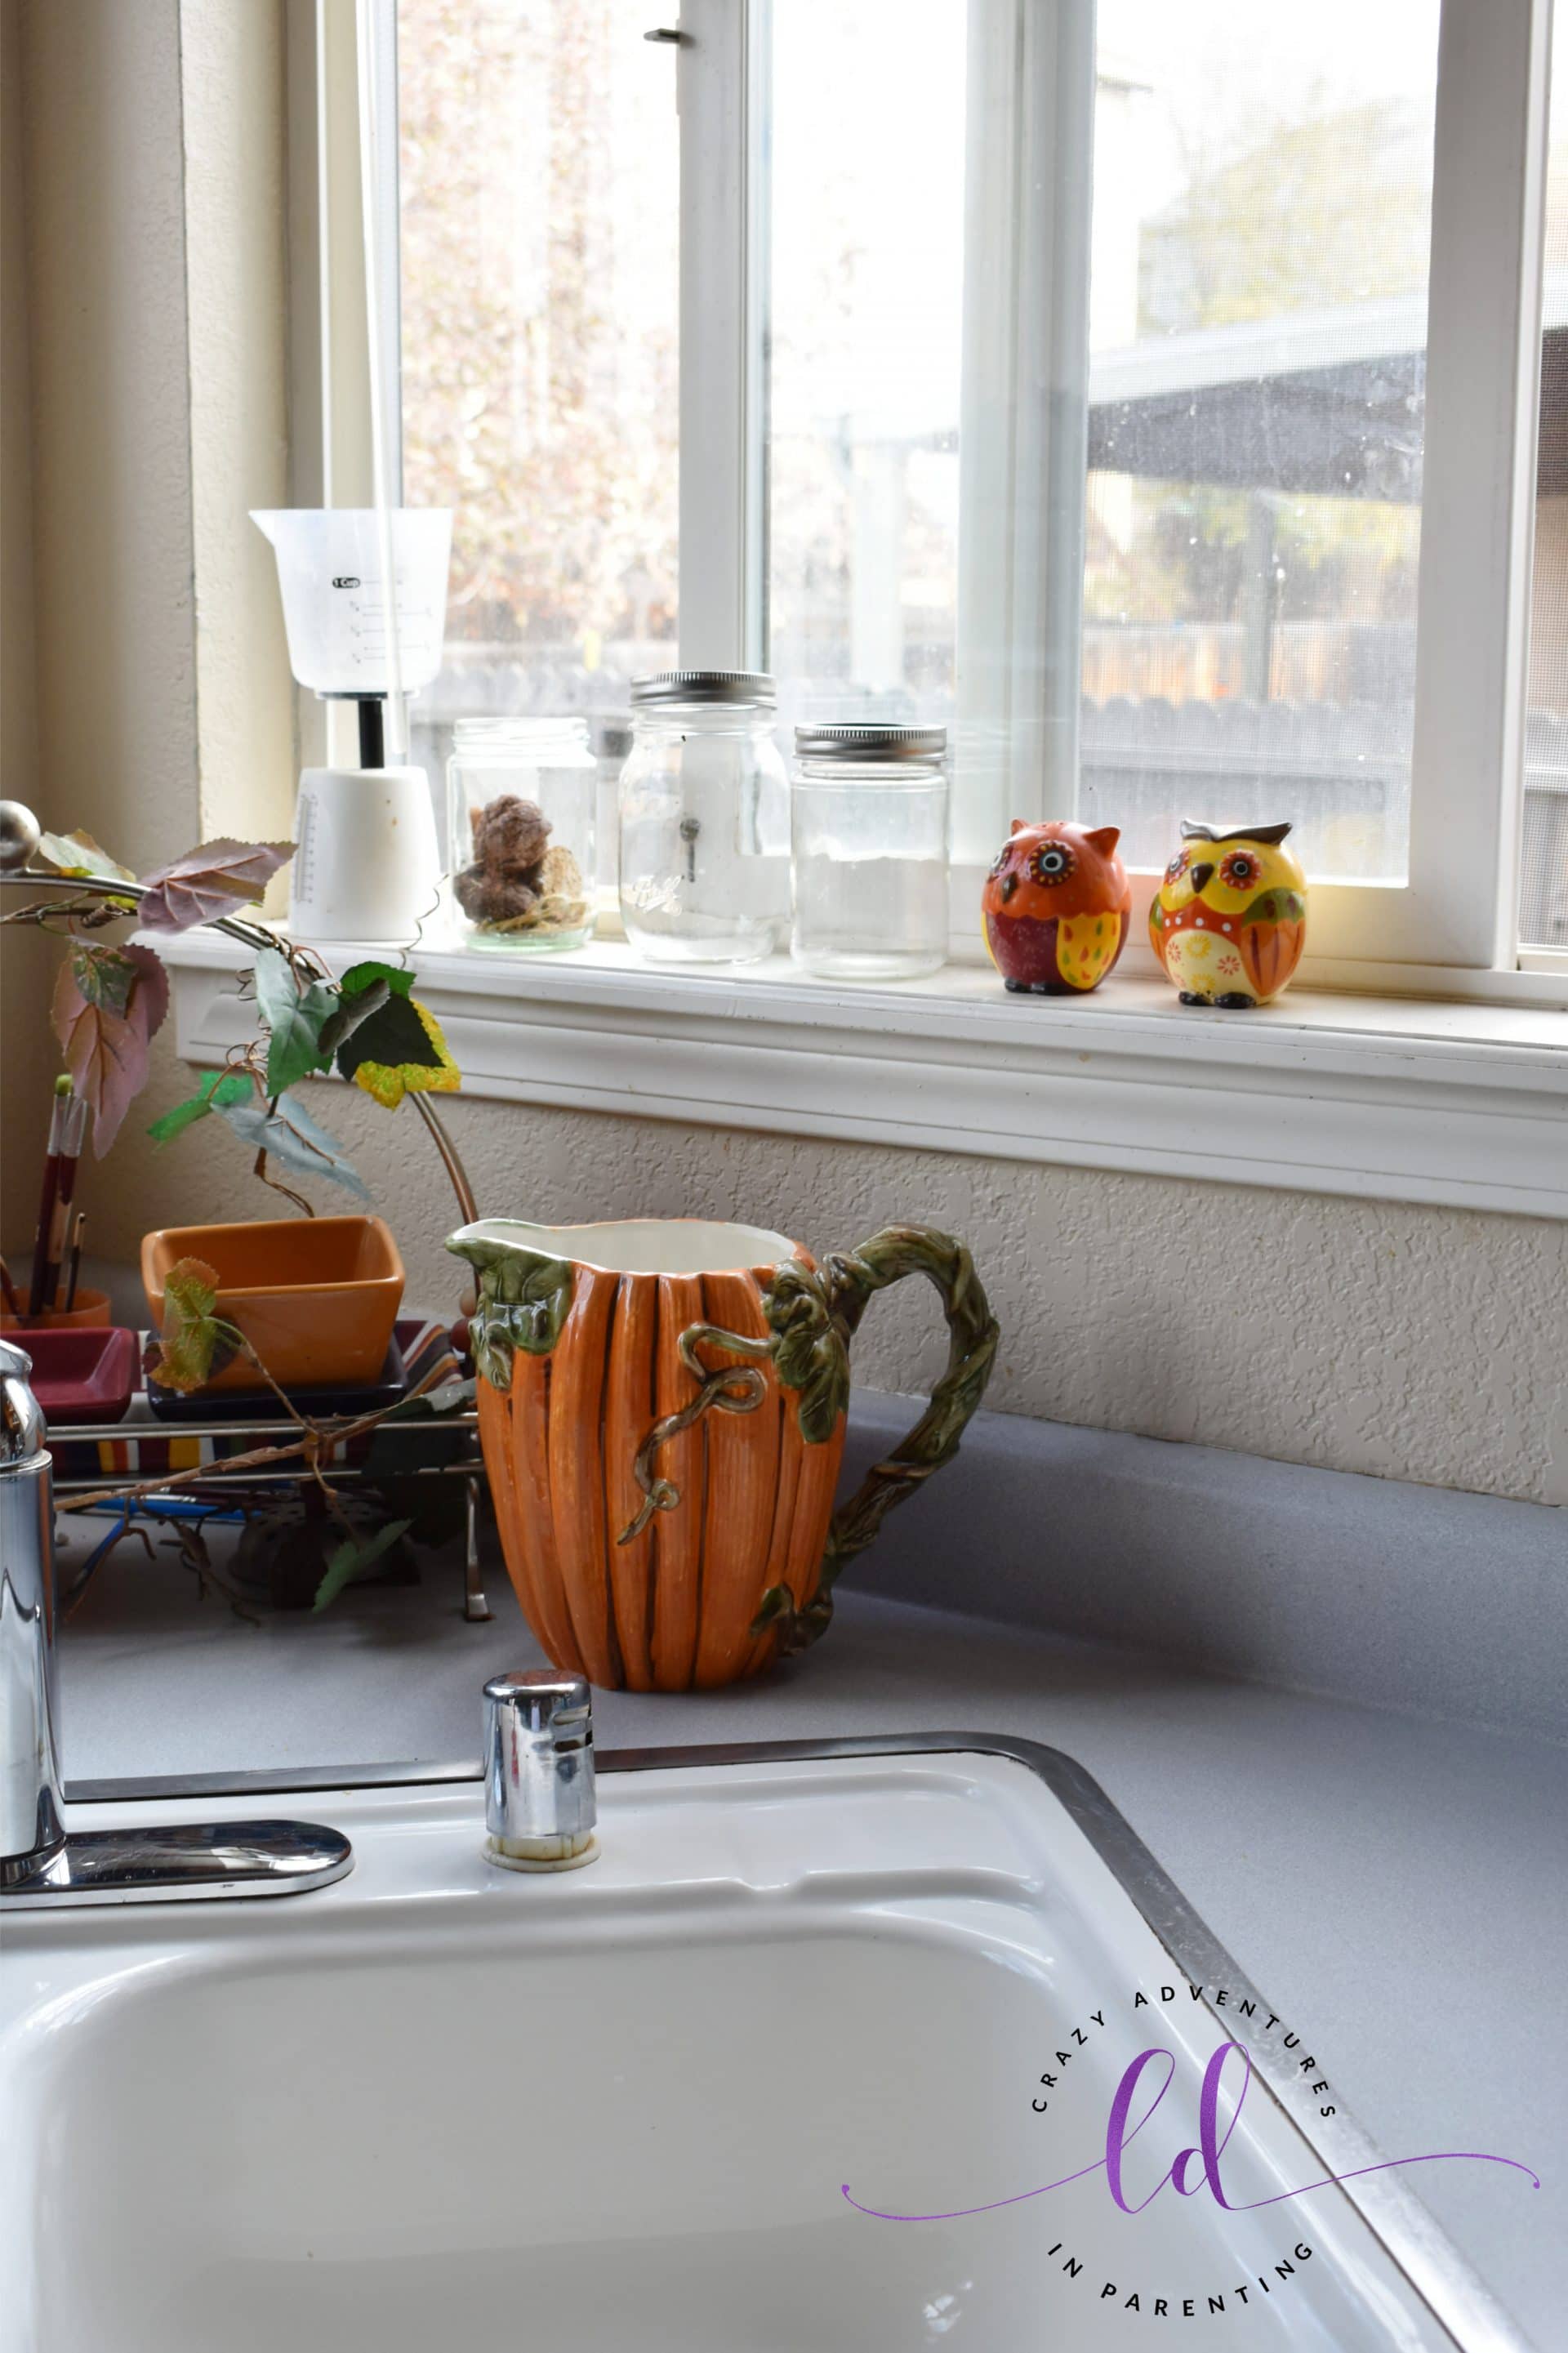 Pitcher by the Sink for Halloween and Fall Decor